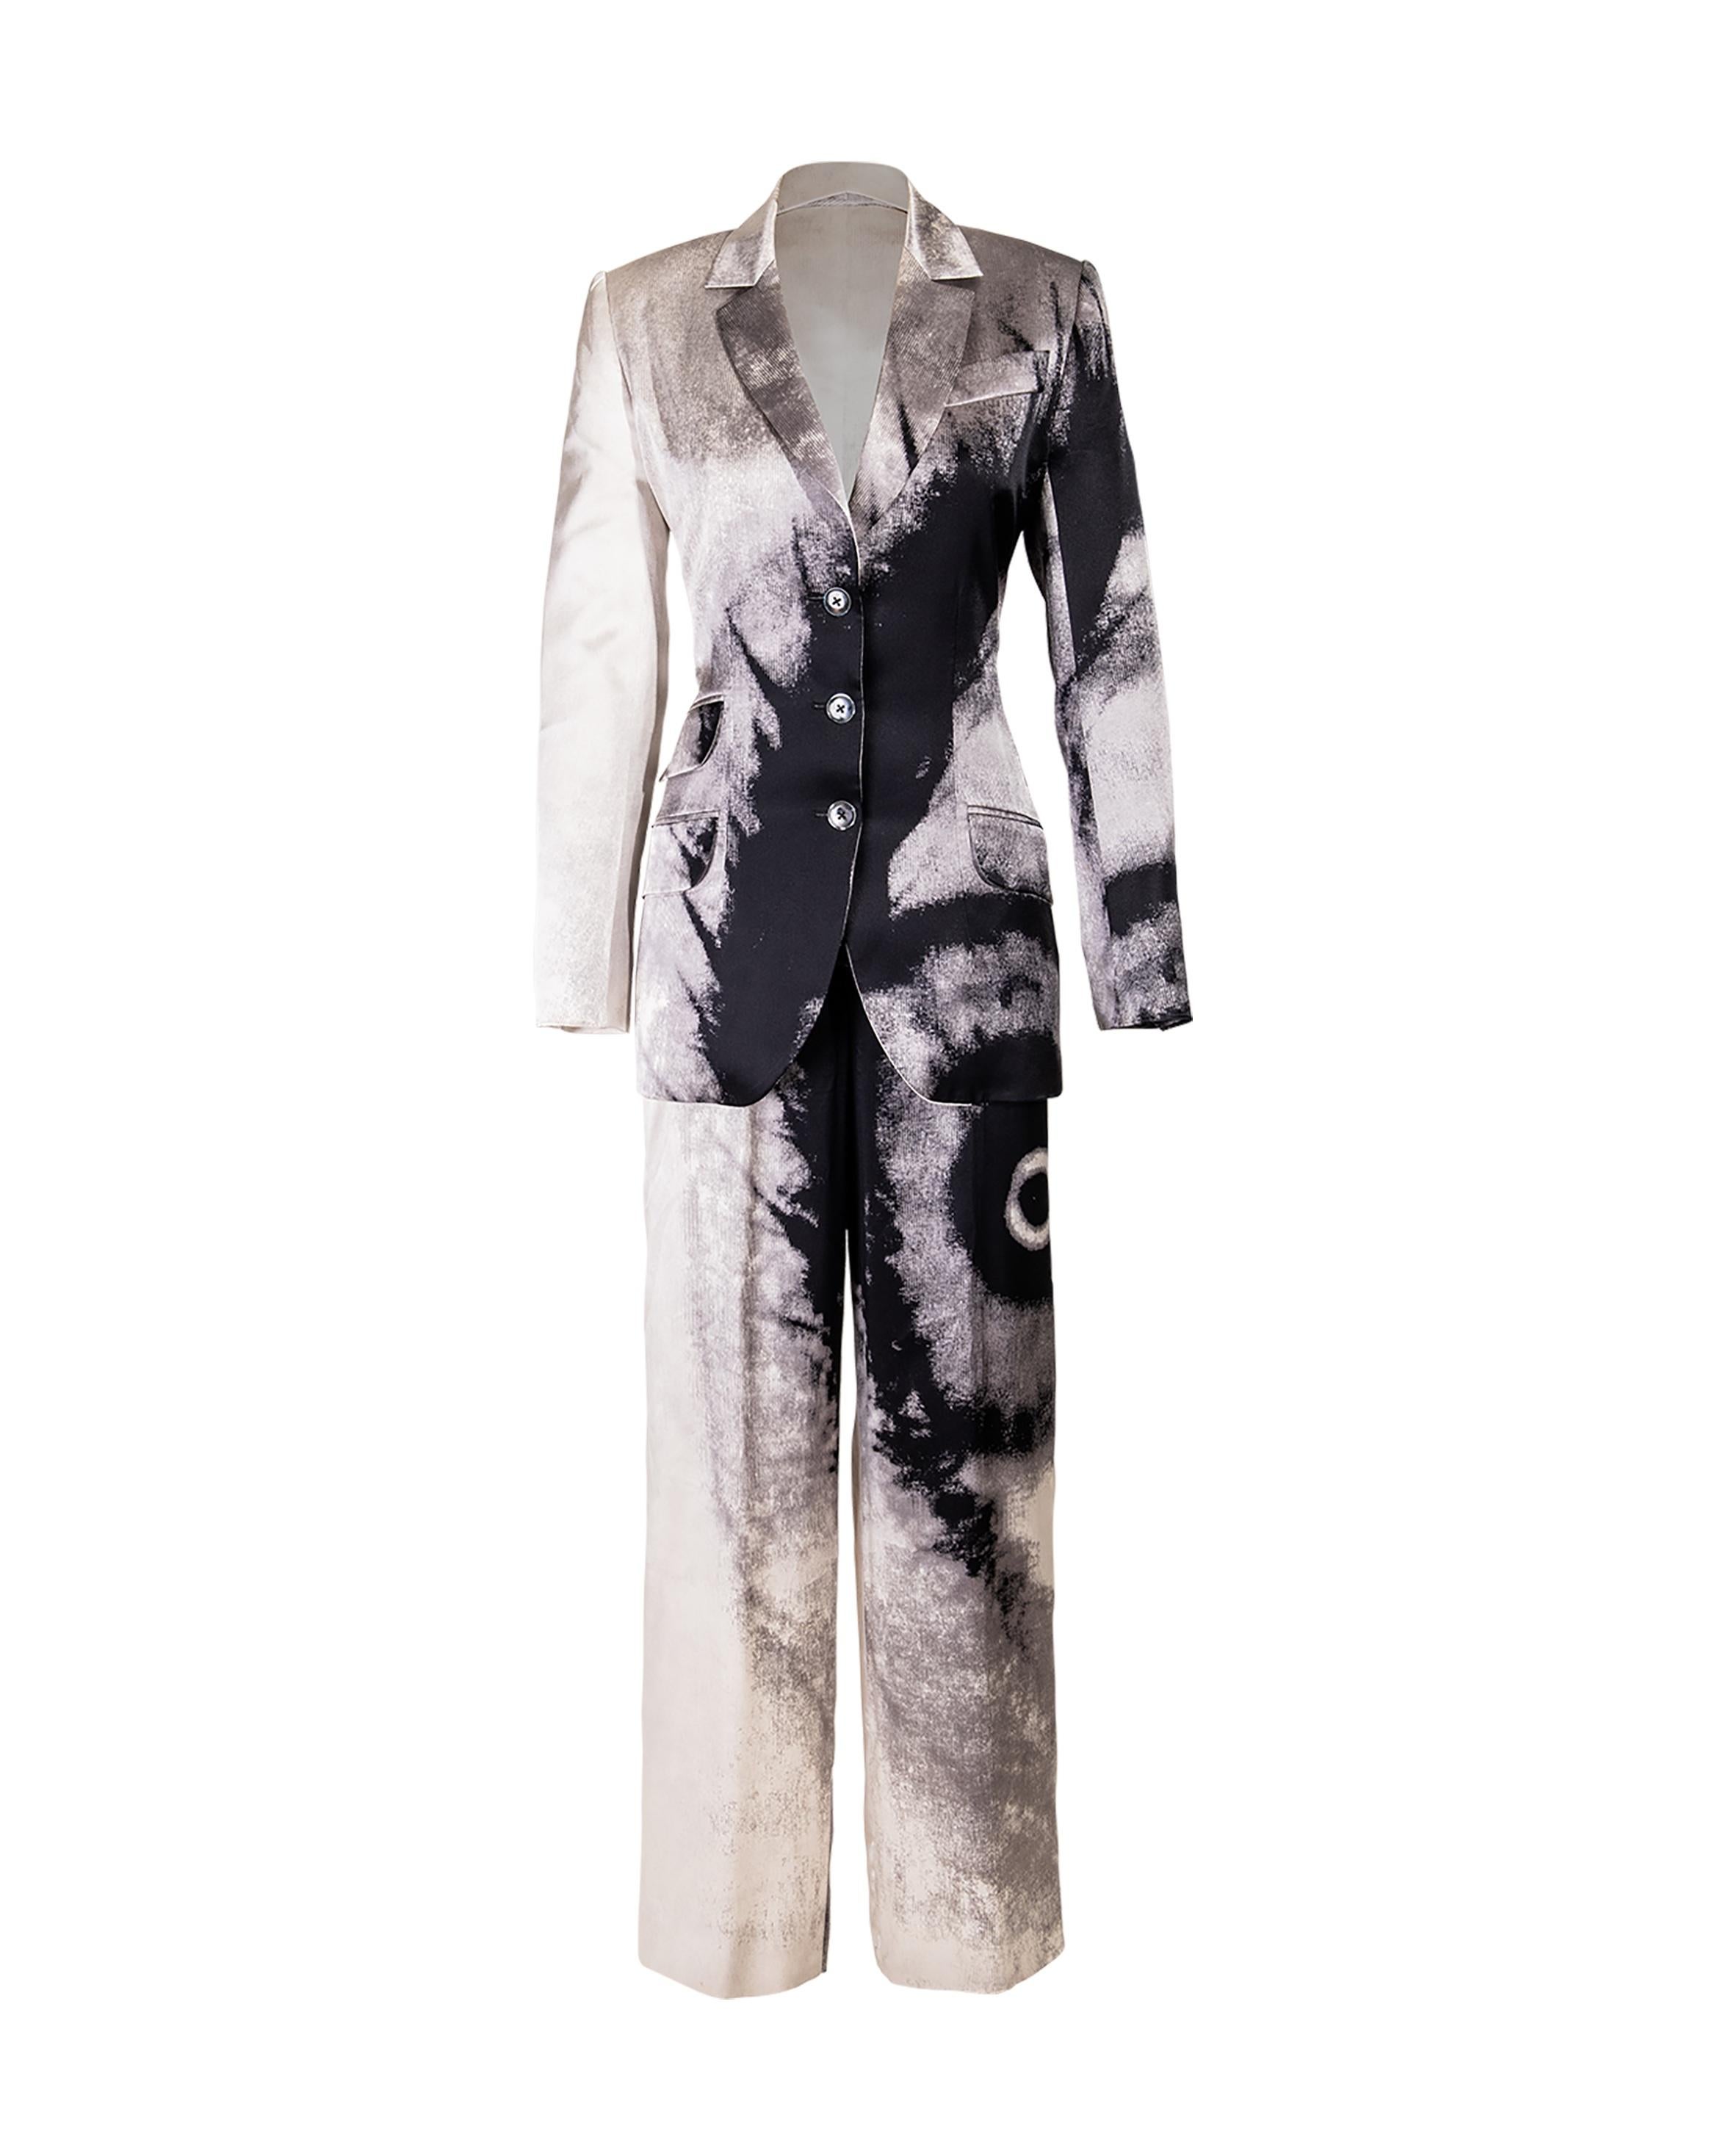 S/S 1999 Givenchy by Alexander McQueen 3-Piece Dip Dye Silk Suit Set In Good Condition In North Hollywood, CA